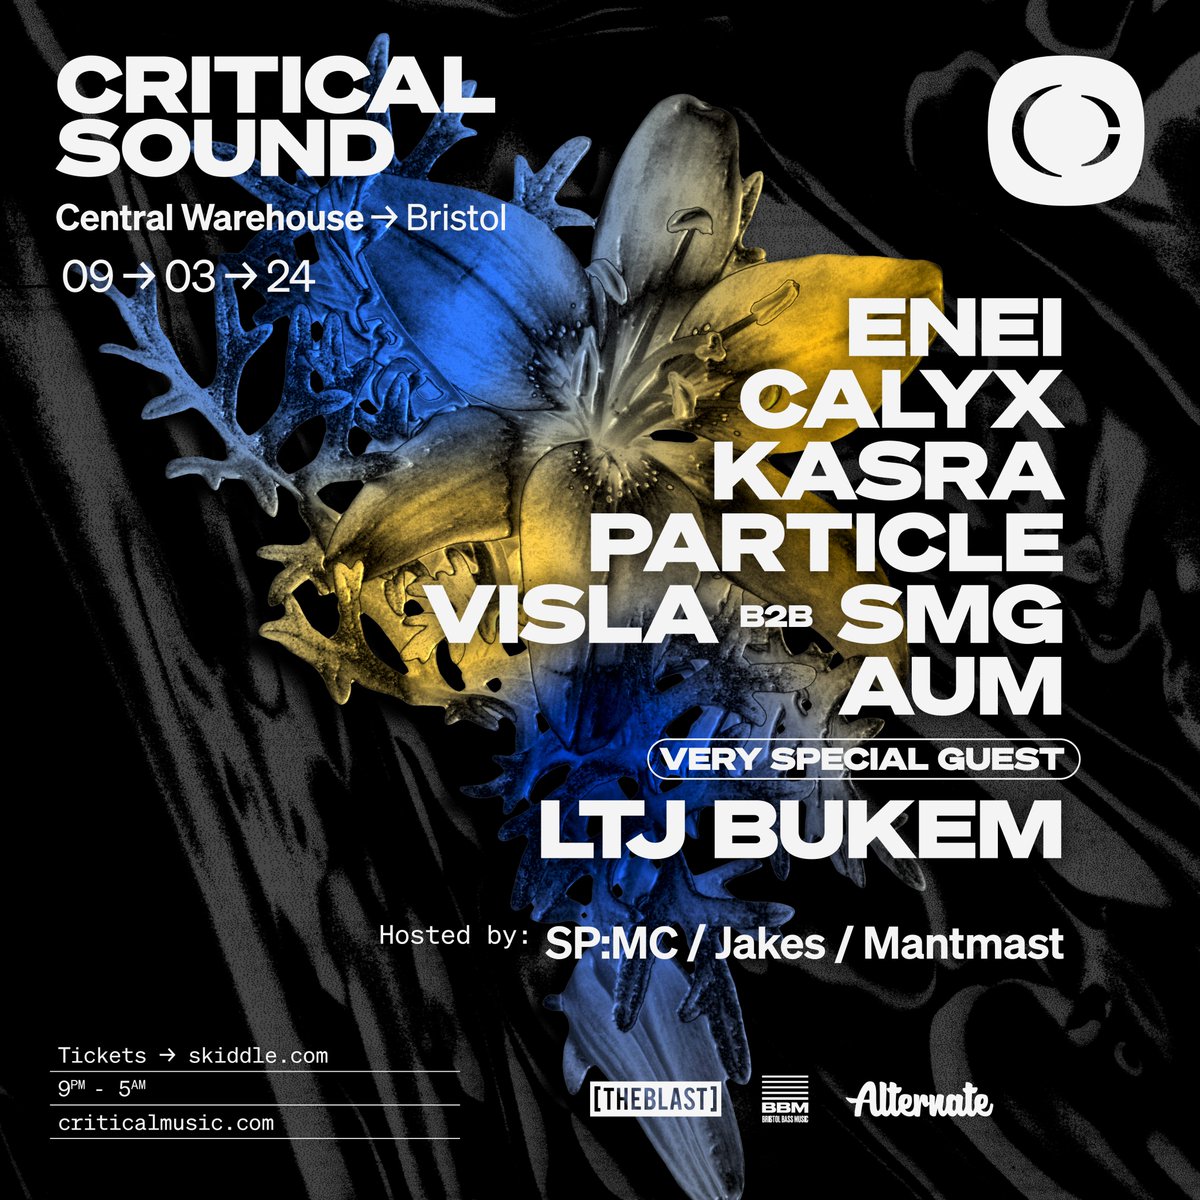 CRITICAL SOUND - BRISTOL - 09.03.24 Presenting the killer lineup for a highly-anticipated return of Critical Sound to Bristol in 2024 🥁 Sign up for tickets → bit.ly/CriticalSoundB… → Pre-sale - Mon 18th 6pm → Public sale - Tues 19th 10am